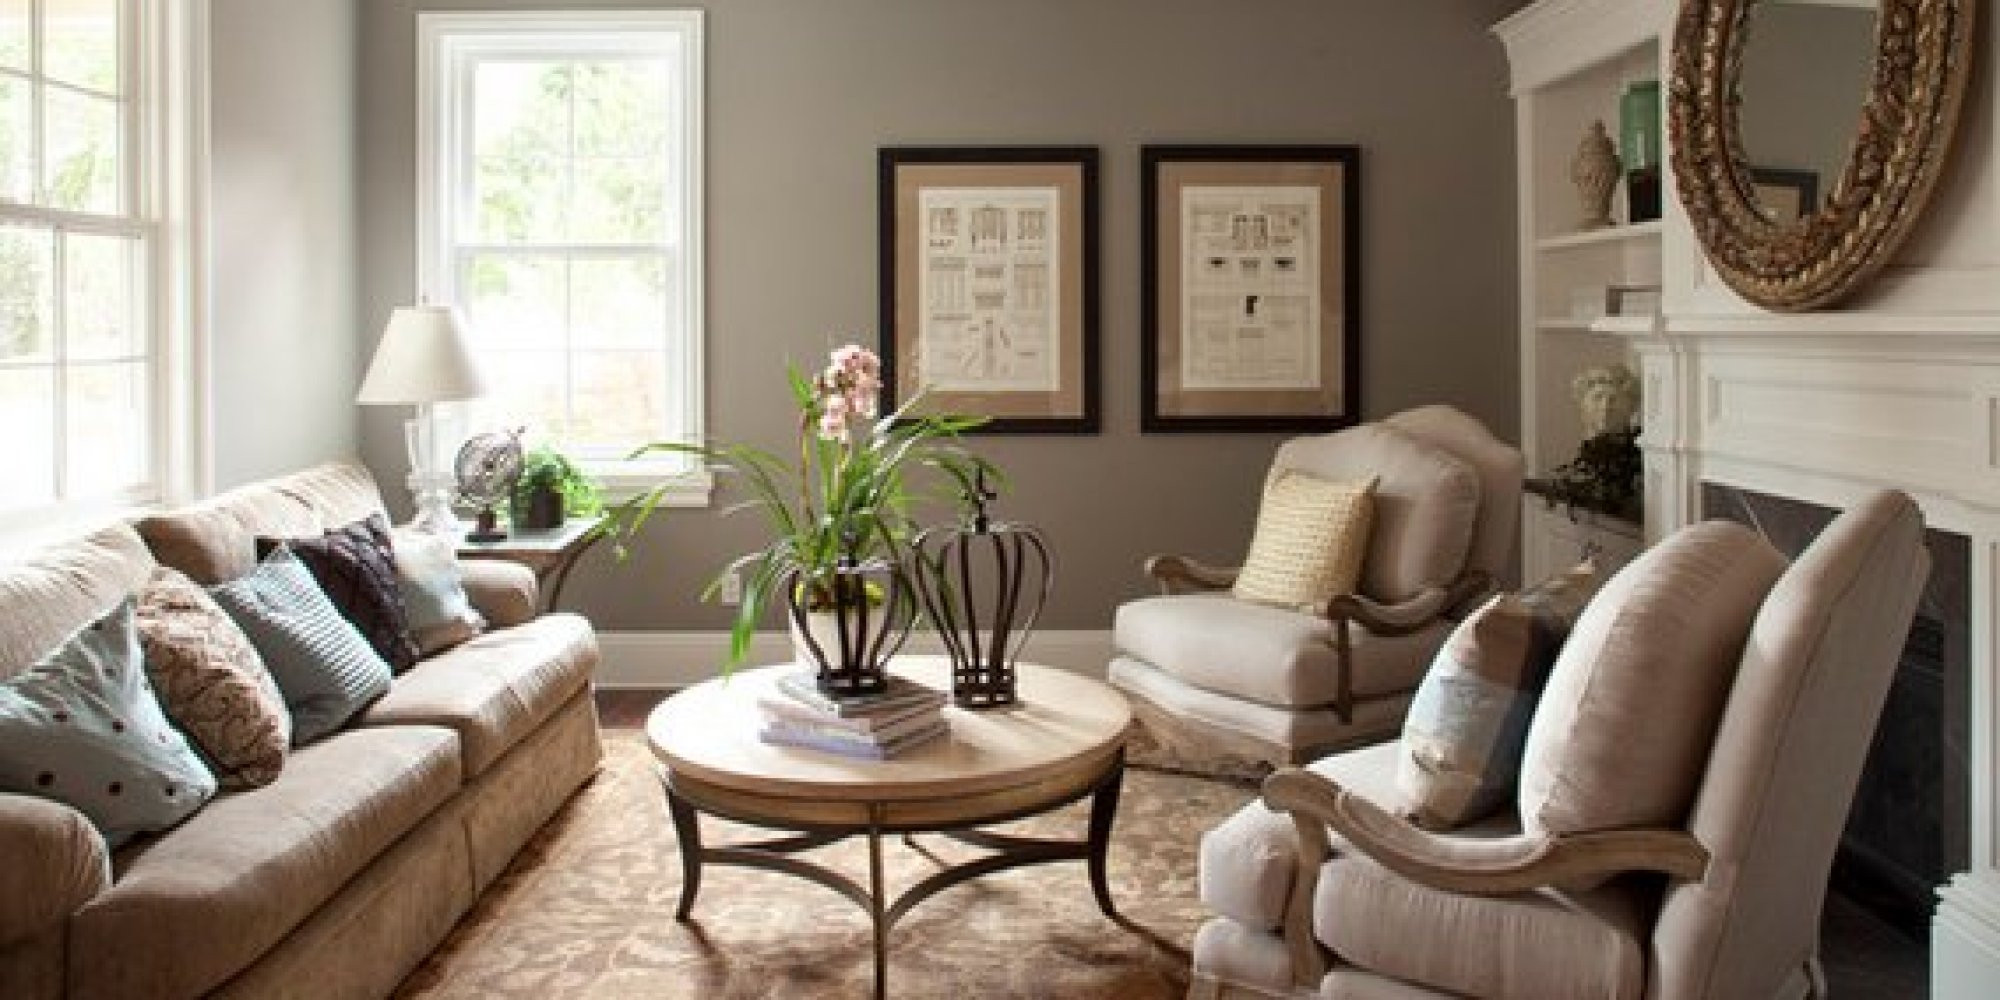 Colors To Paint Living Room
 Best Neutral Living Room Paint Colors